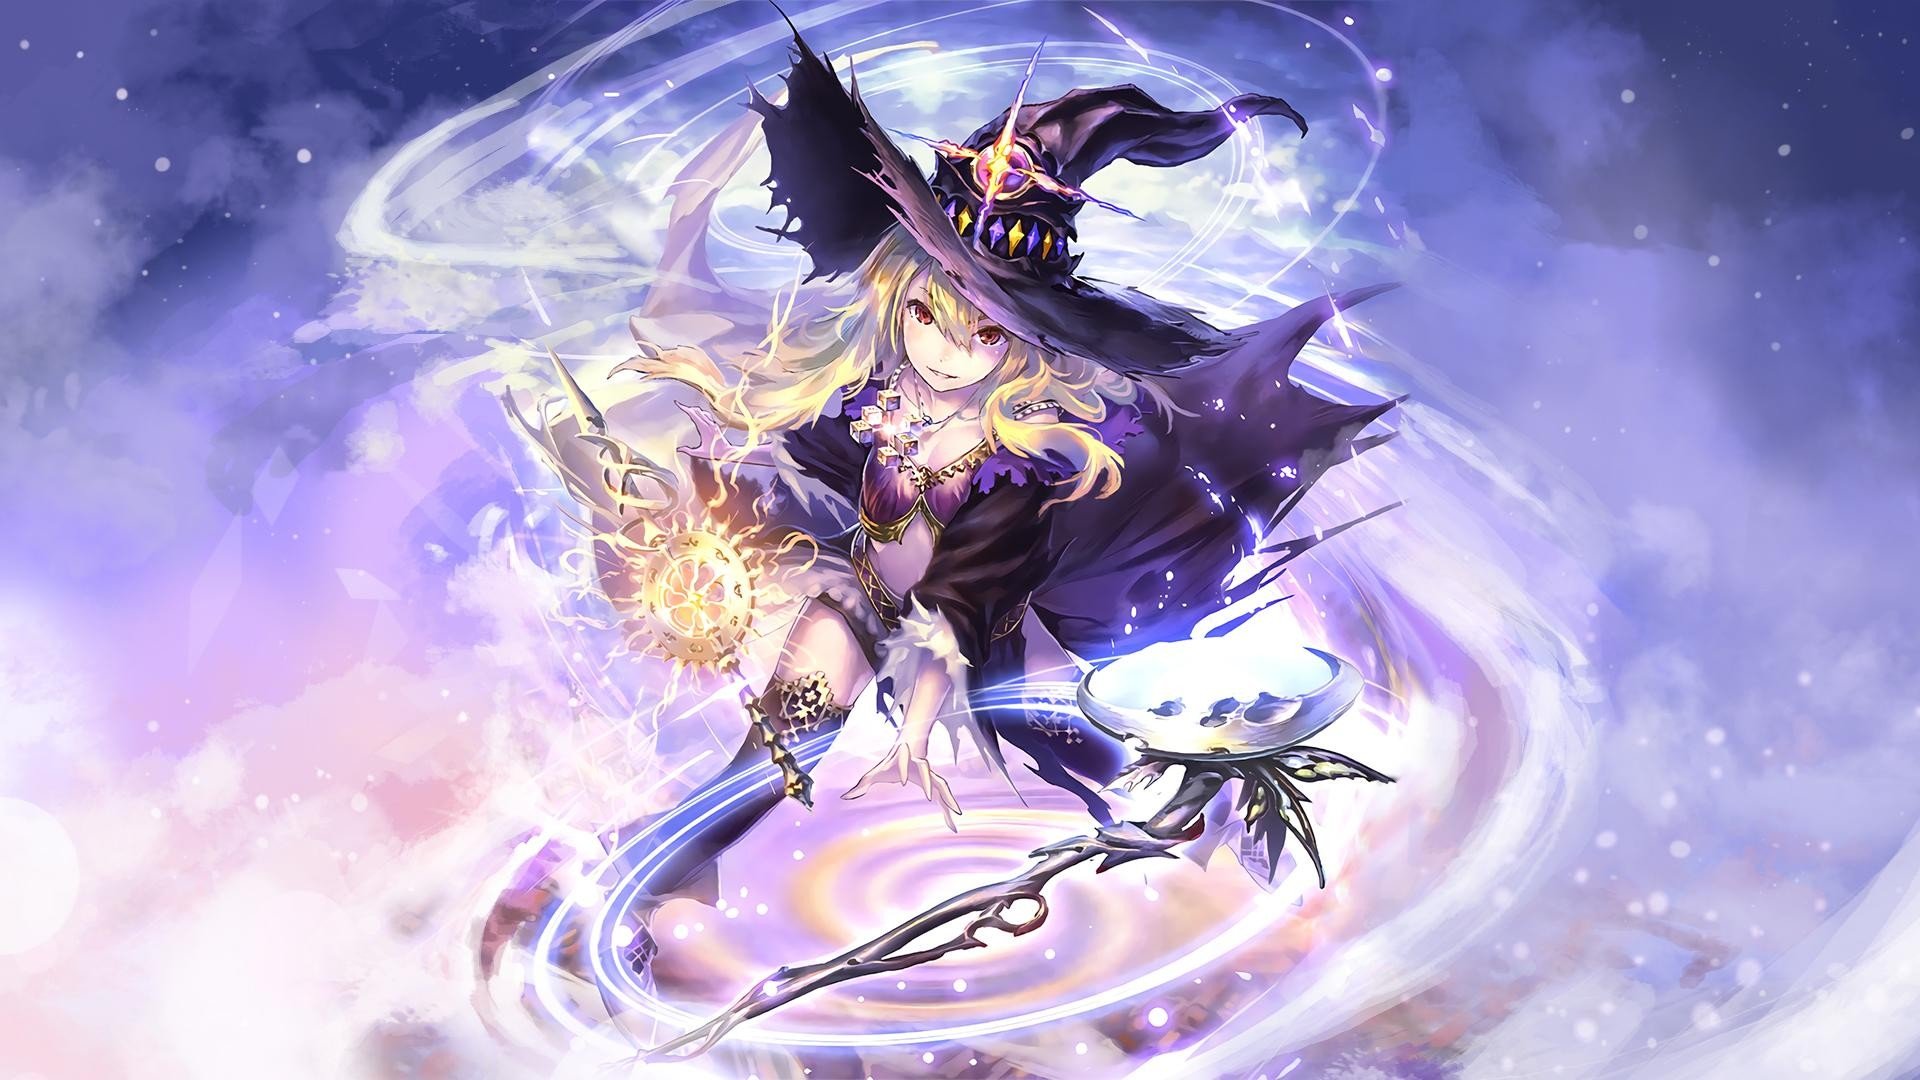 Wizard Witch Blonde Long Hair Red Eyes Looking At Viewer Anime Anime Girls Daria Shadowverse Thigh Highs Magic Staff Portal Magic Bra Shadowverse Wallpapers Hd Desktop And Mobile Backgrounds